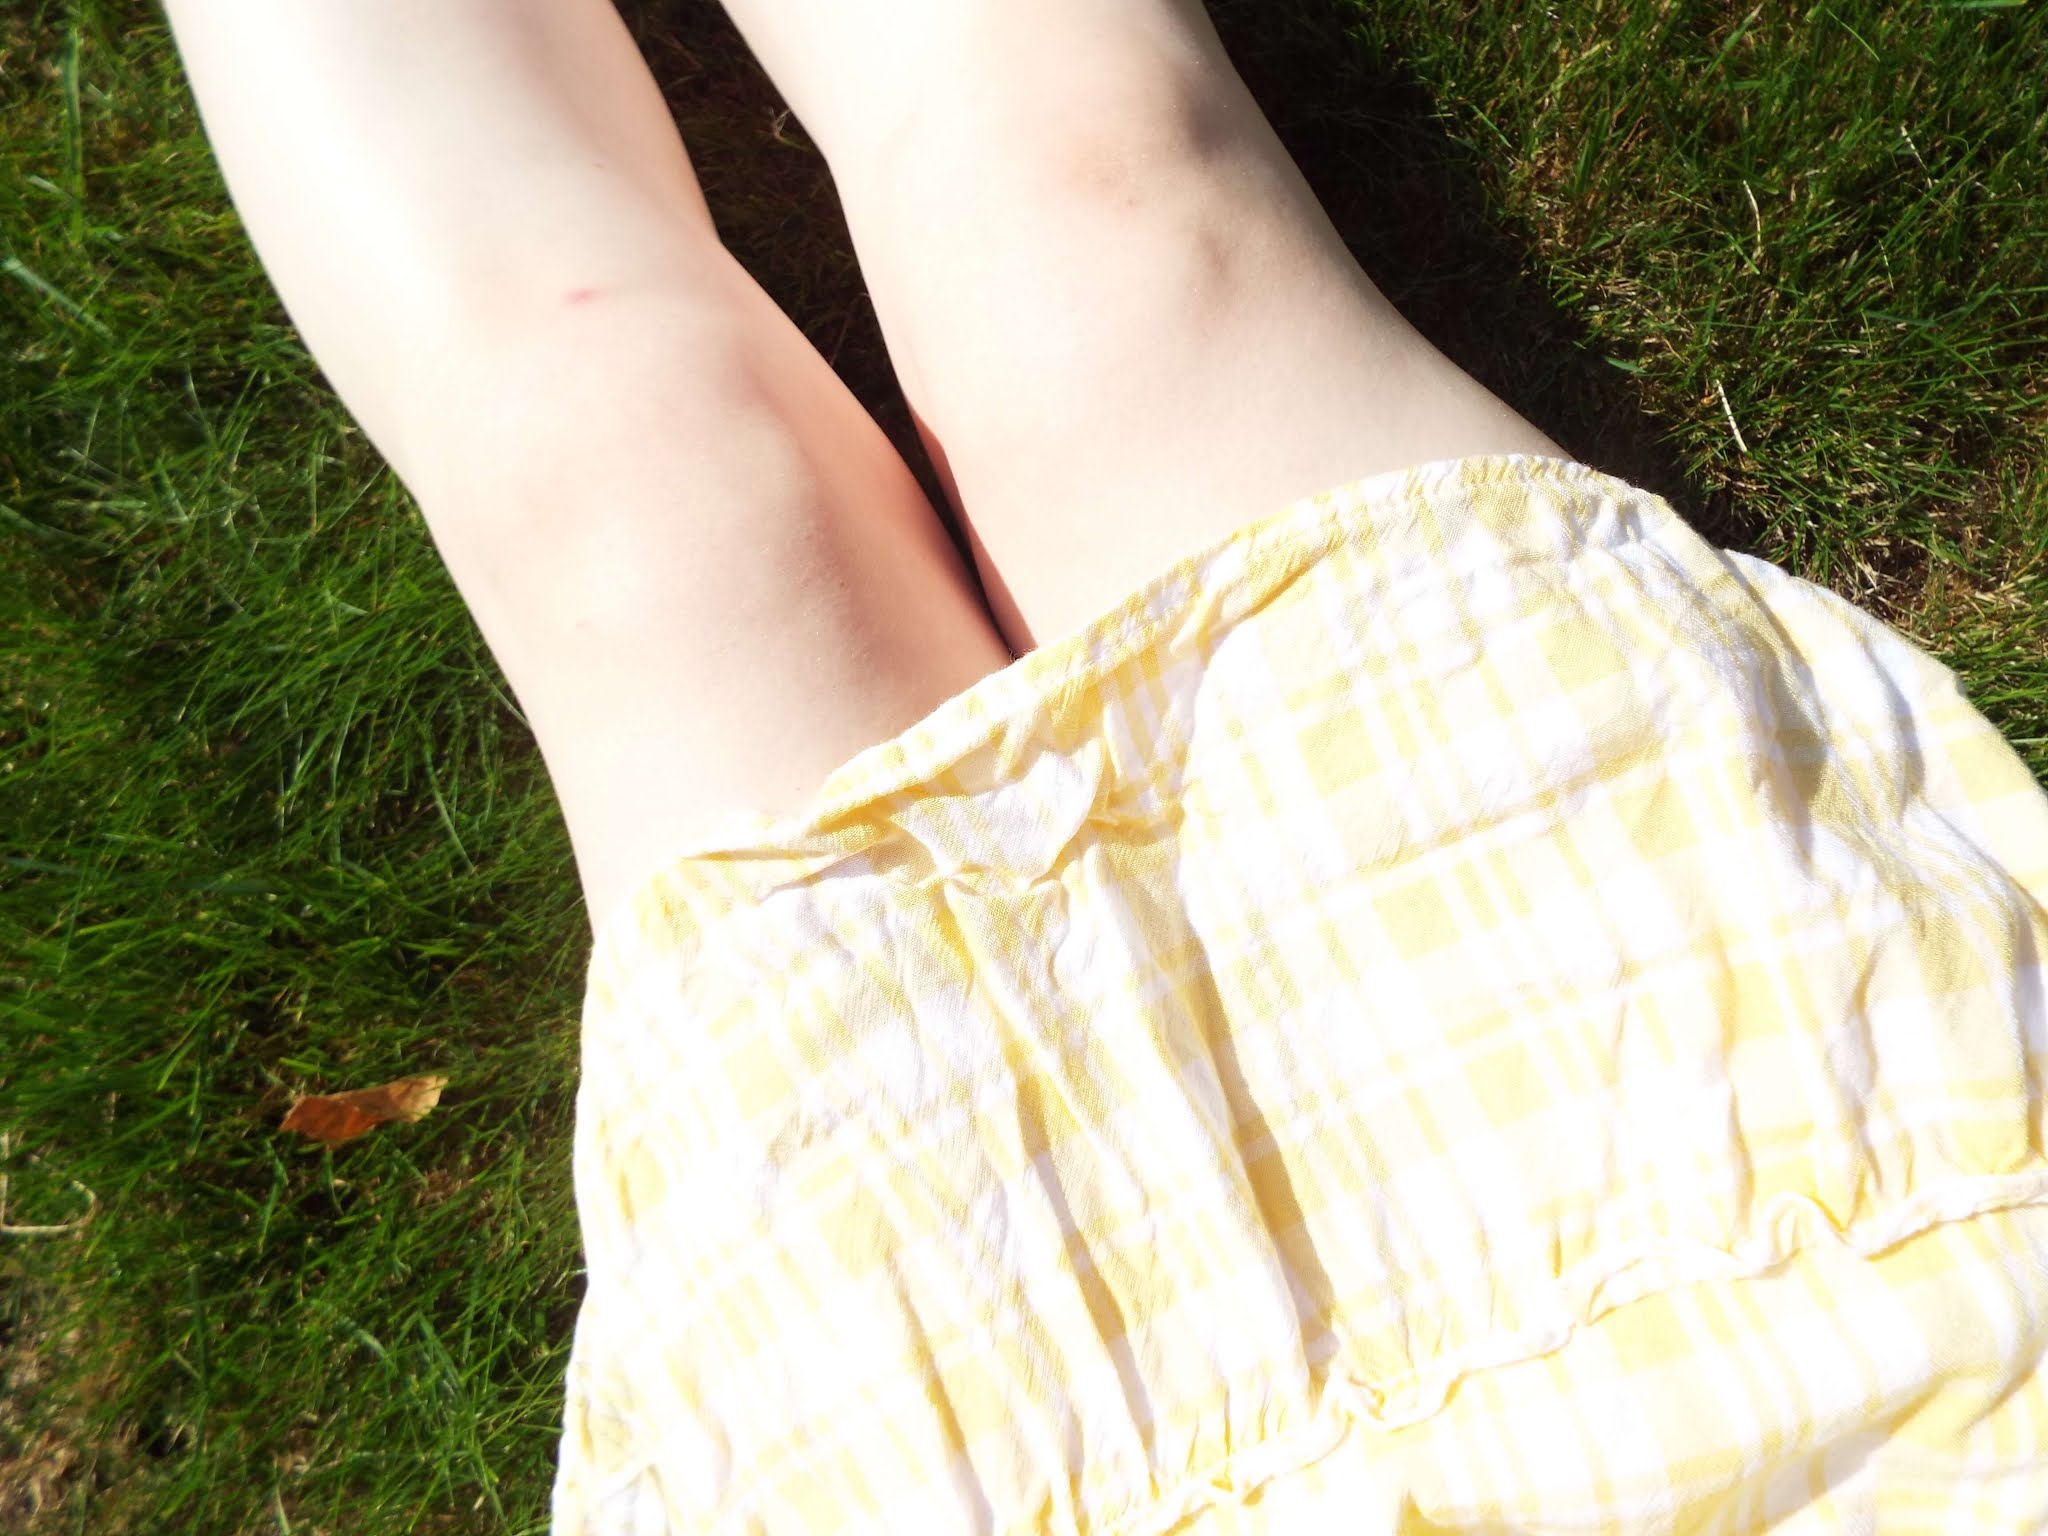 Legs resting, stretched out, on the grass diagonally. My yellow gingham dress rests over the tops of my legs.